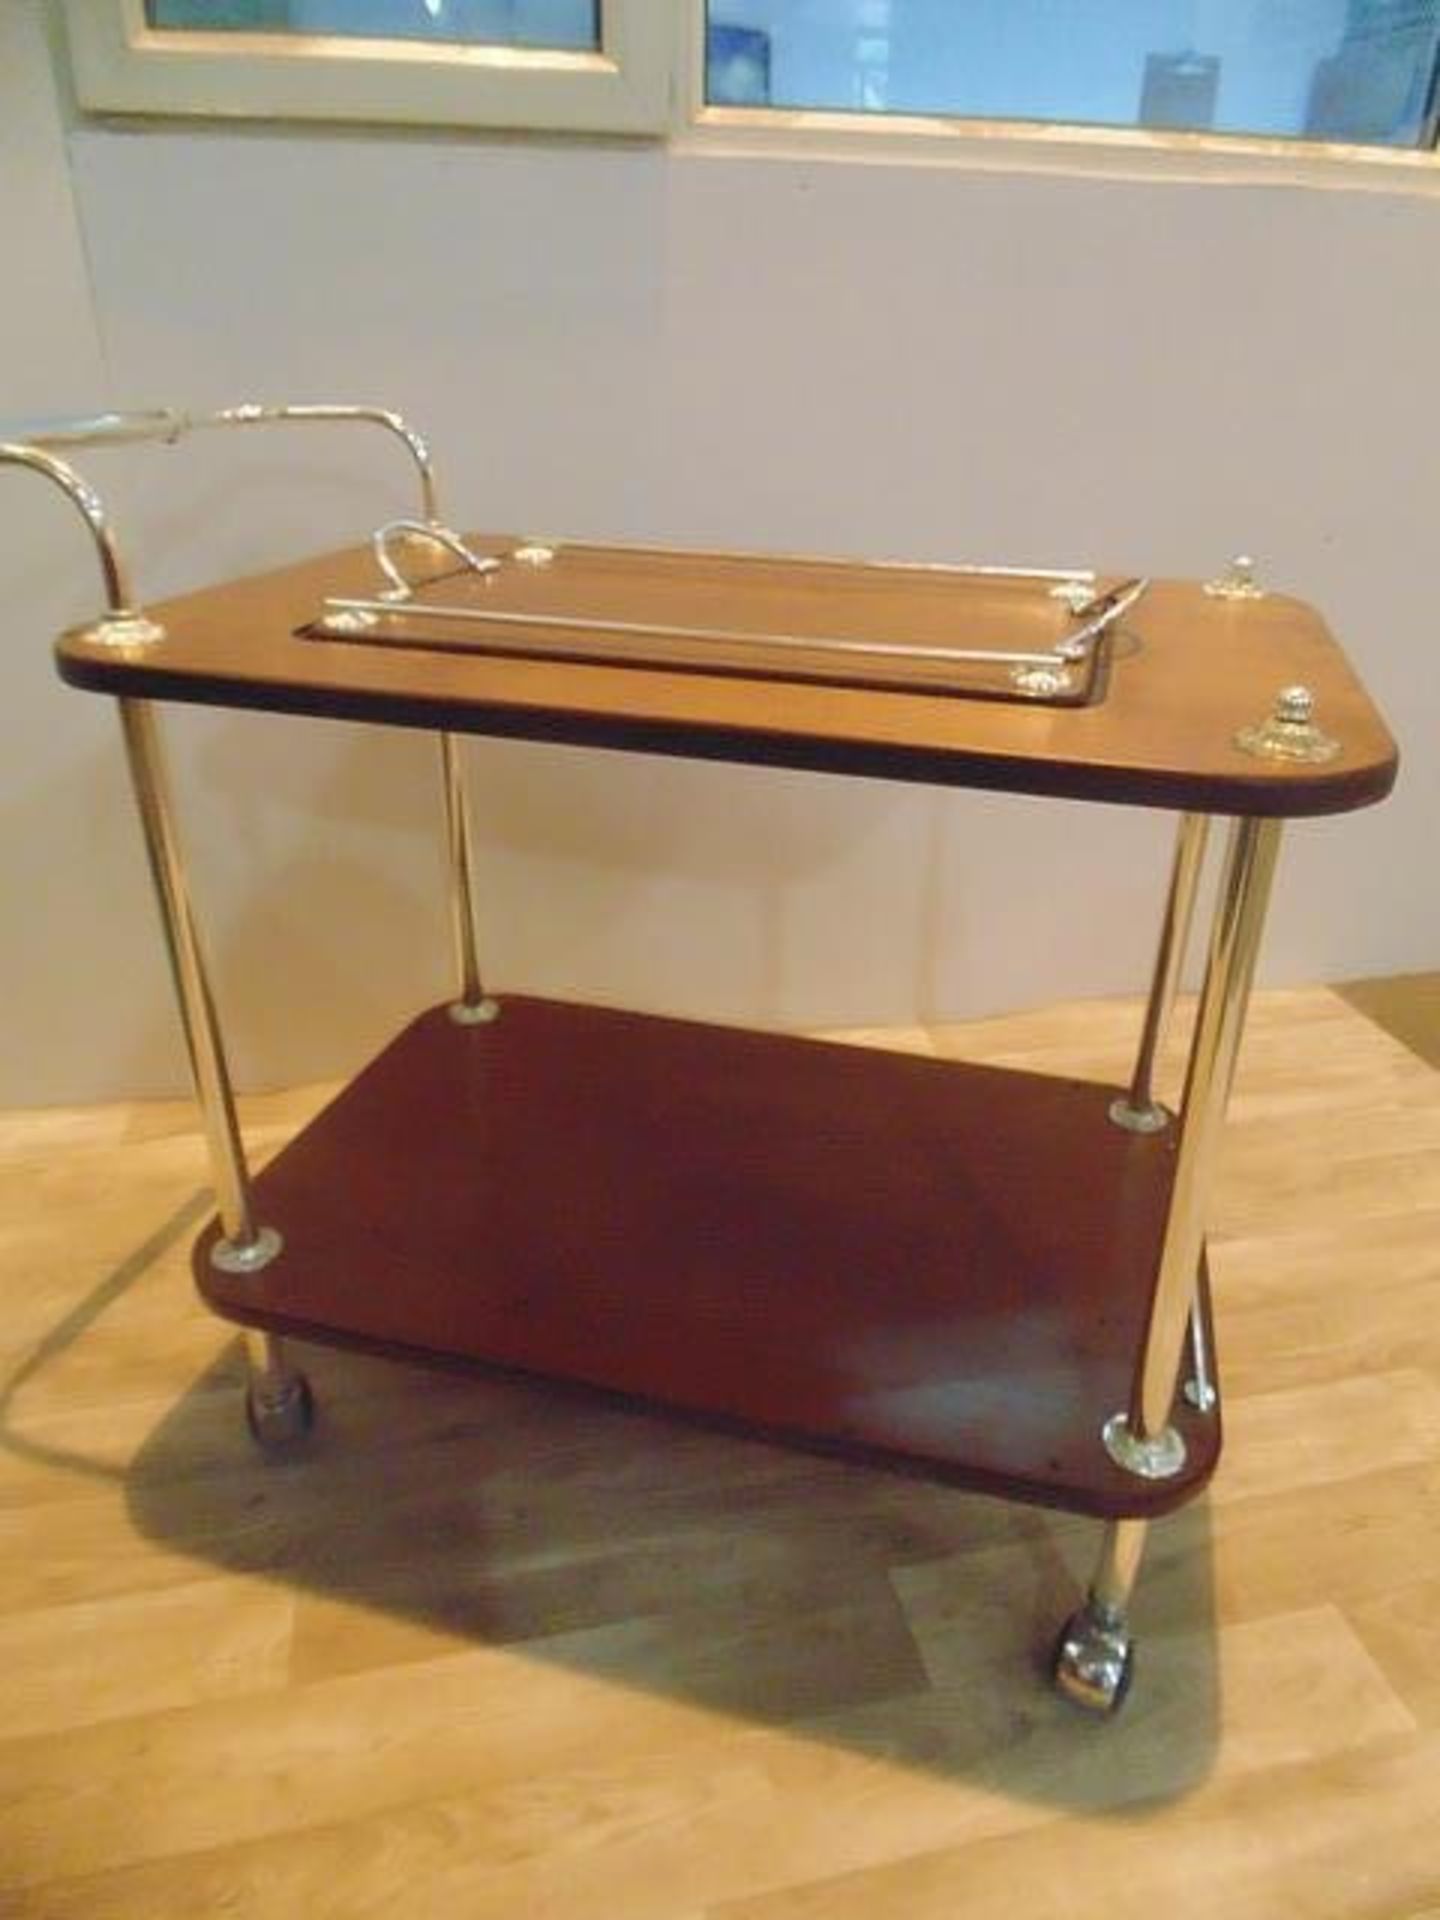 Mobile trolley wood and silver with mirror glass inset top 930mm x 520mm x 790mm